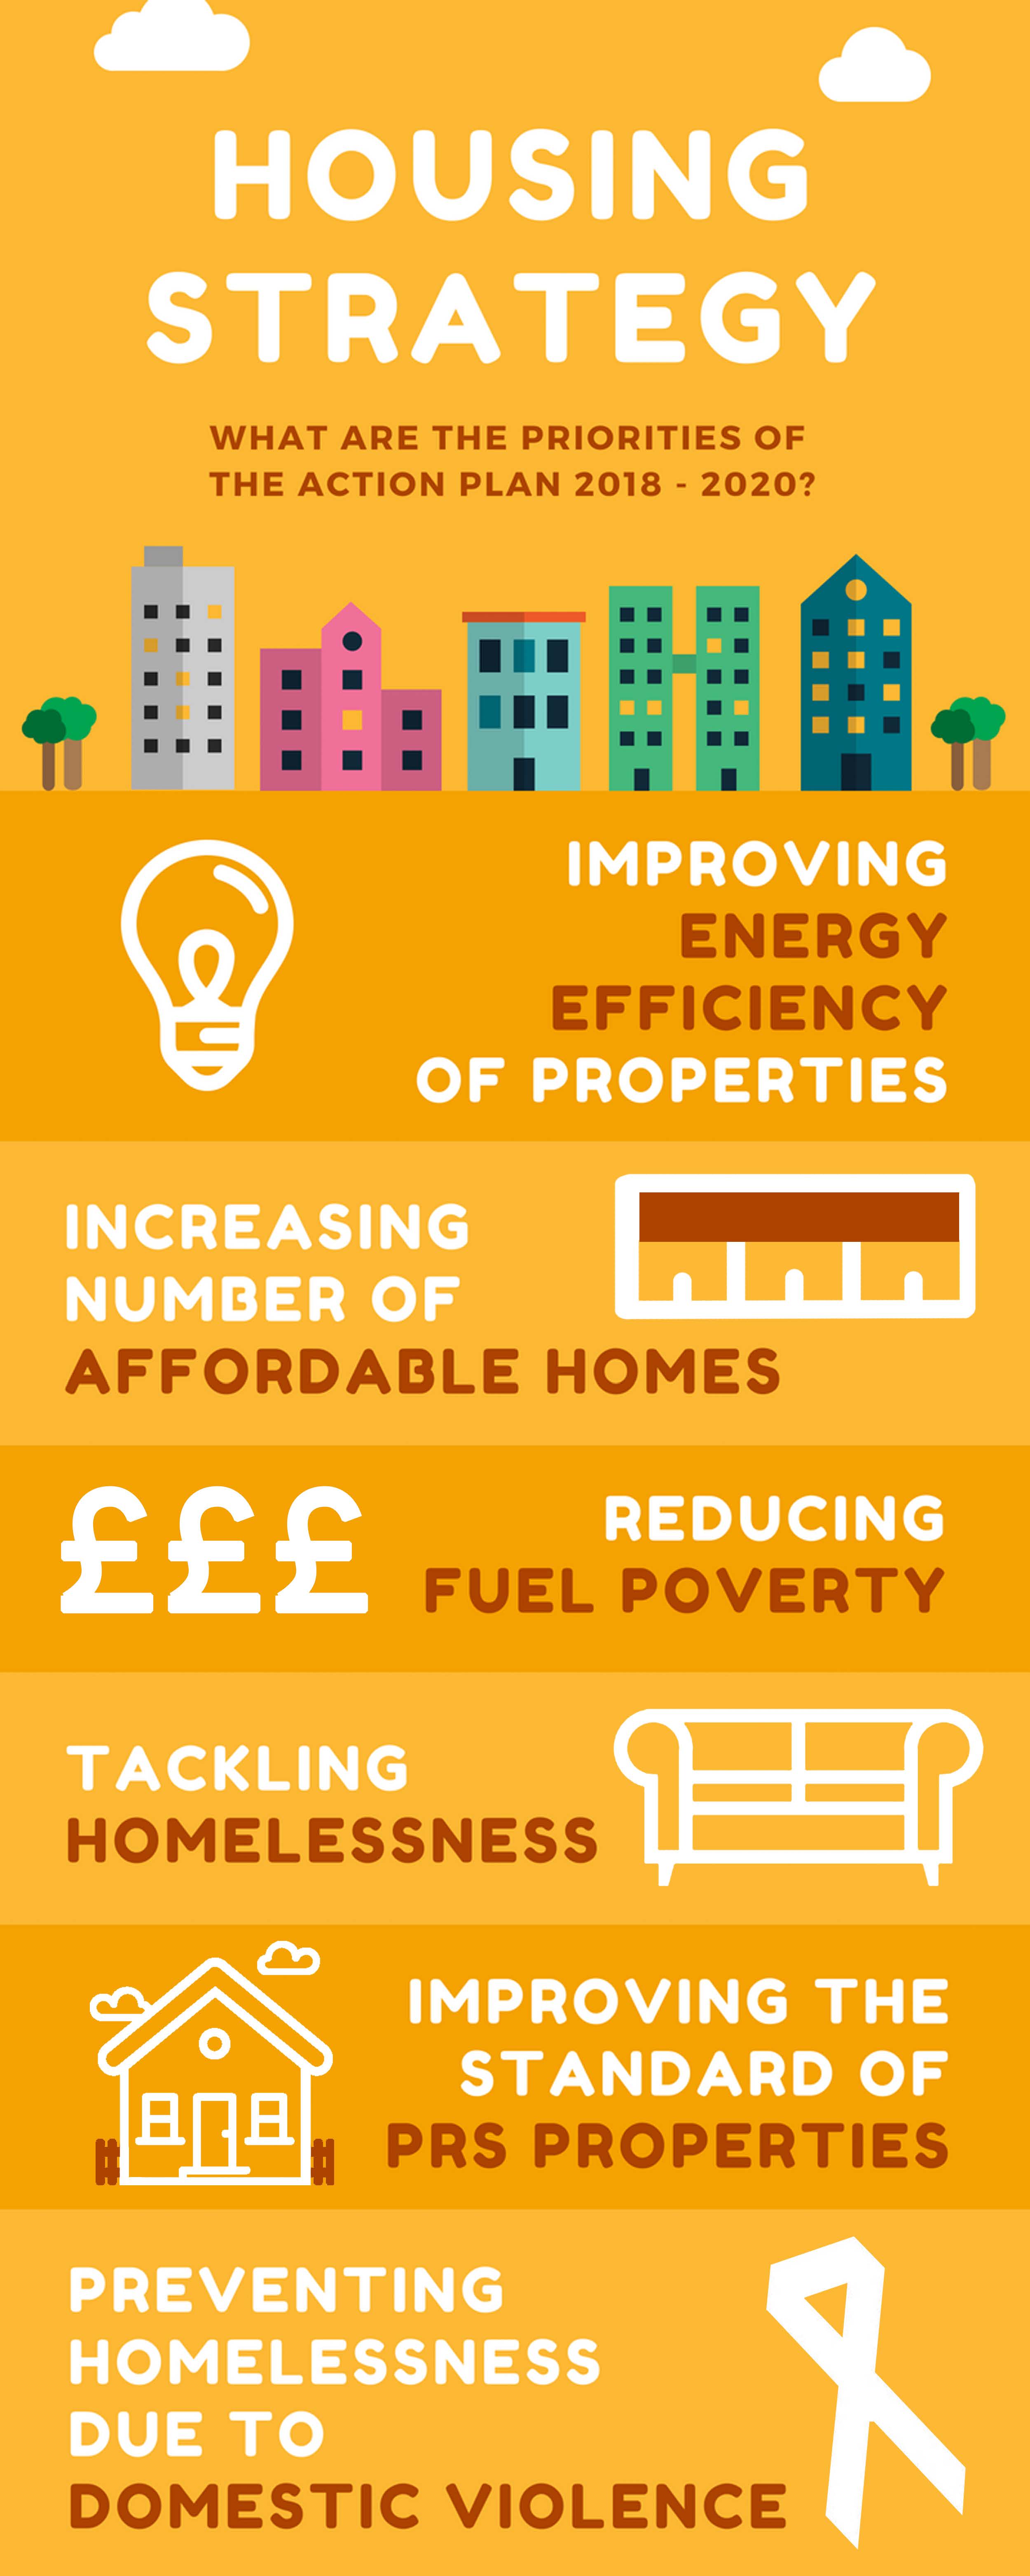 Housing strategy infographic showing information from reports to inform priorities